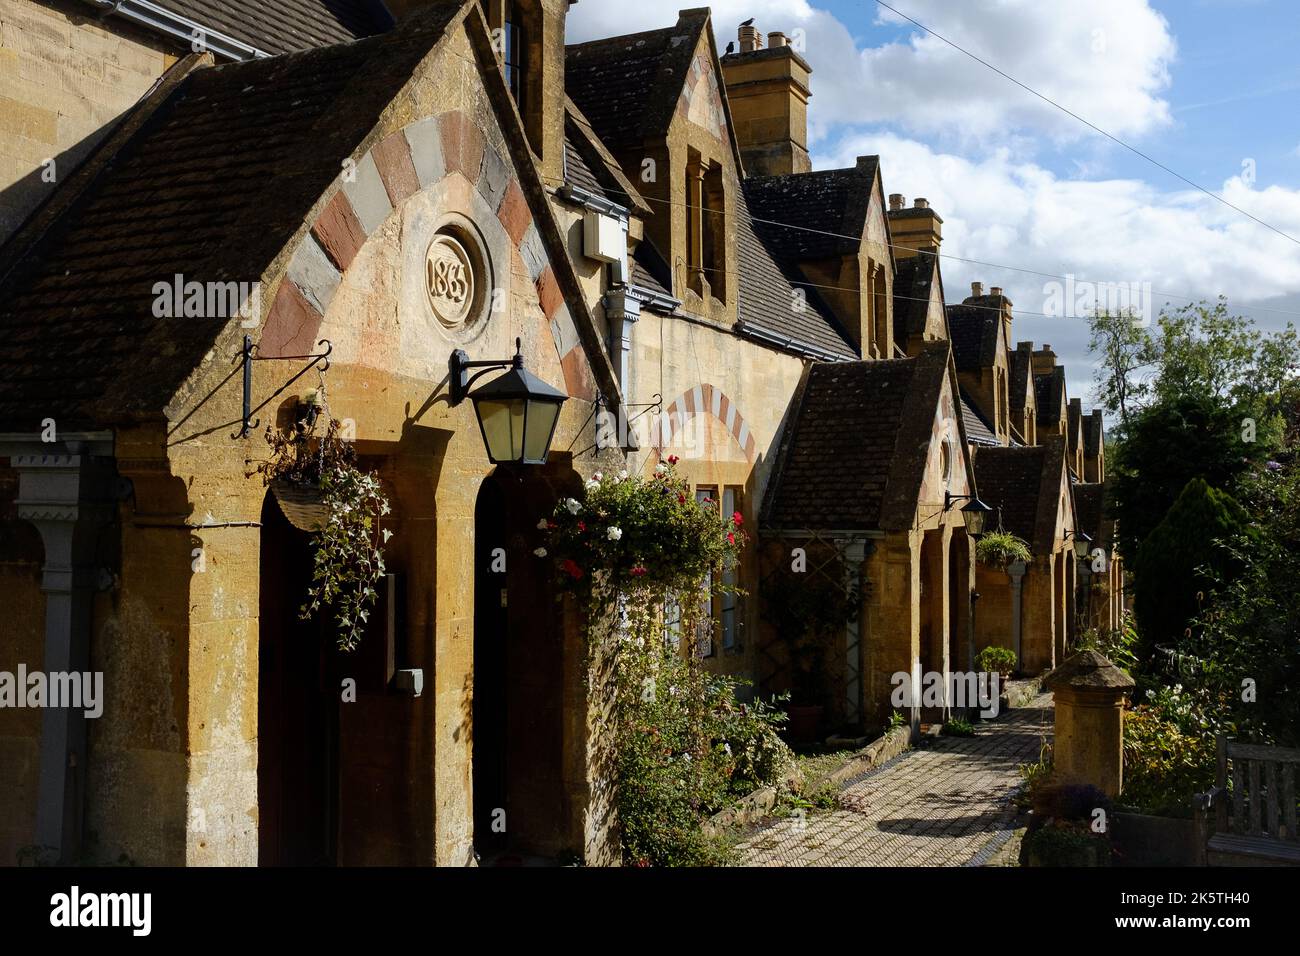 Dent's Terrace Alms Houses, Winchcombe, Gloucestershire Stock Photo